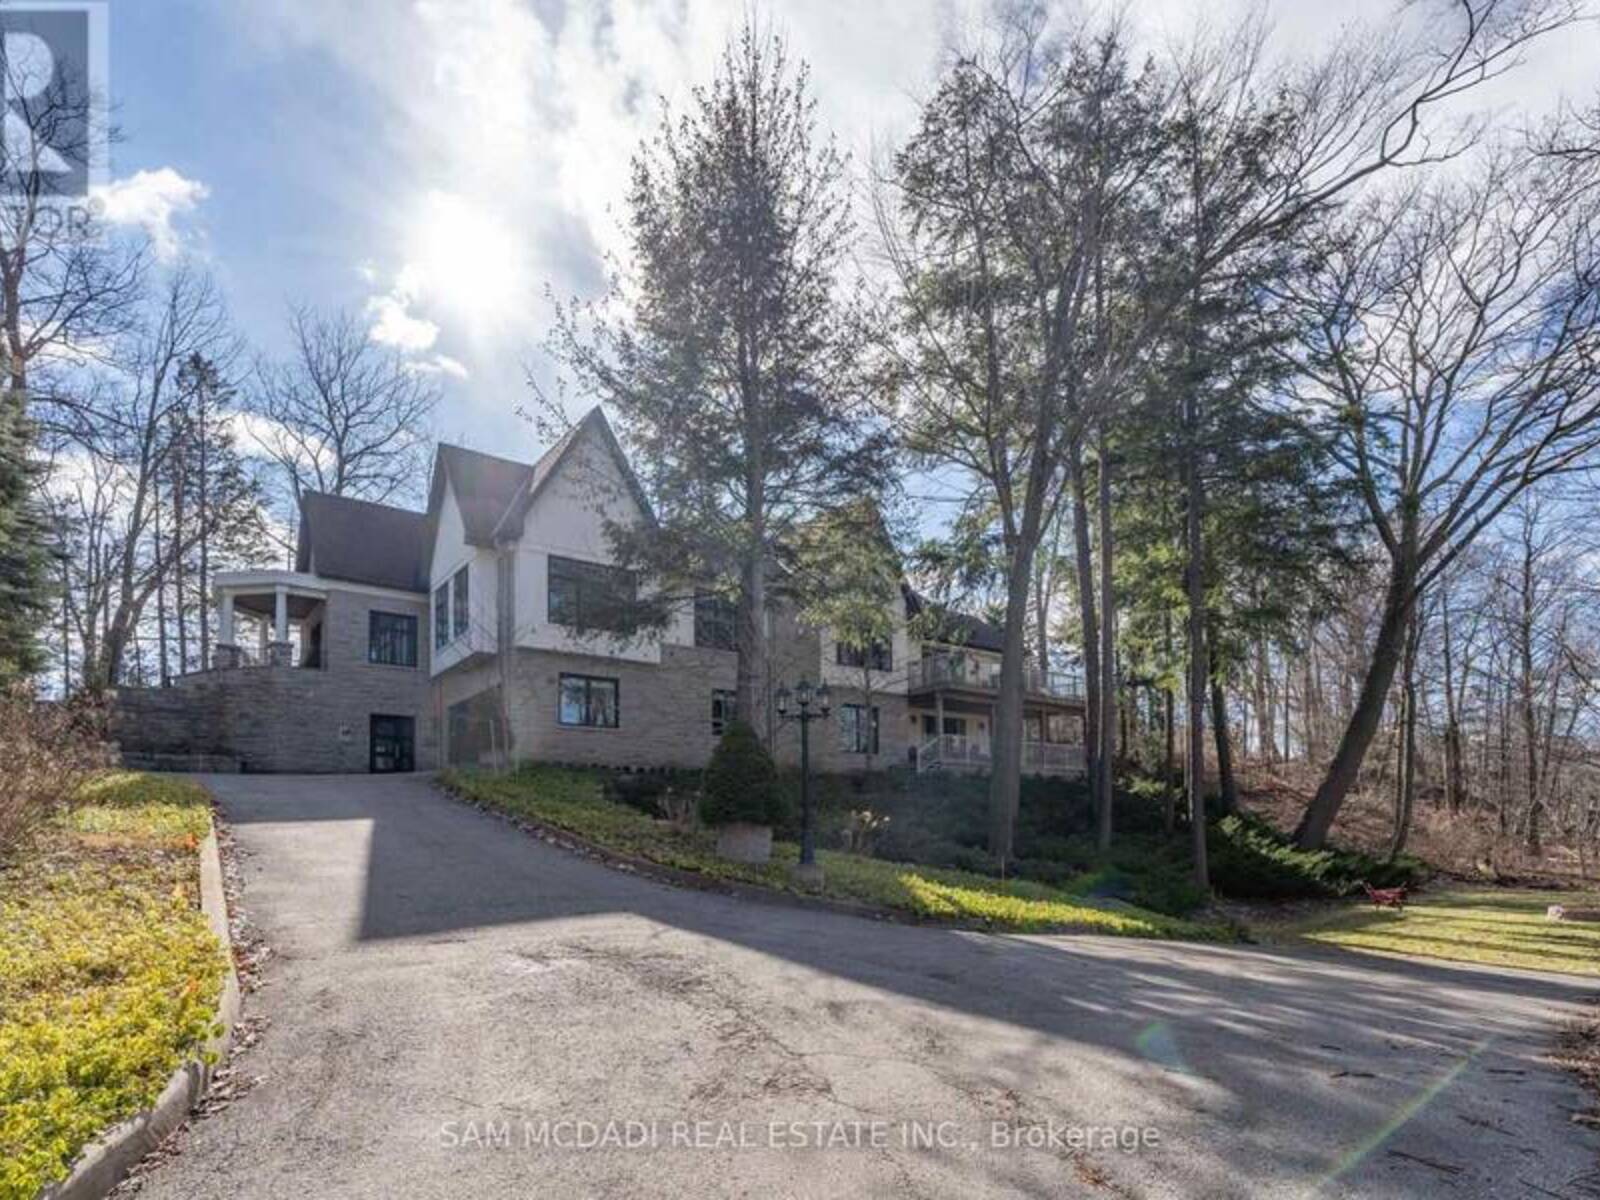 816 MEADOW WOOD RD, Mississauga, Ontario L5J 2S6